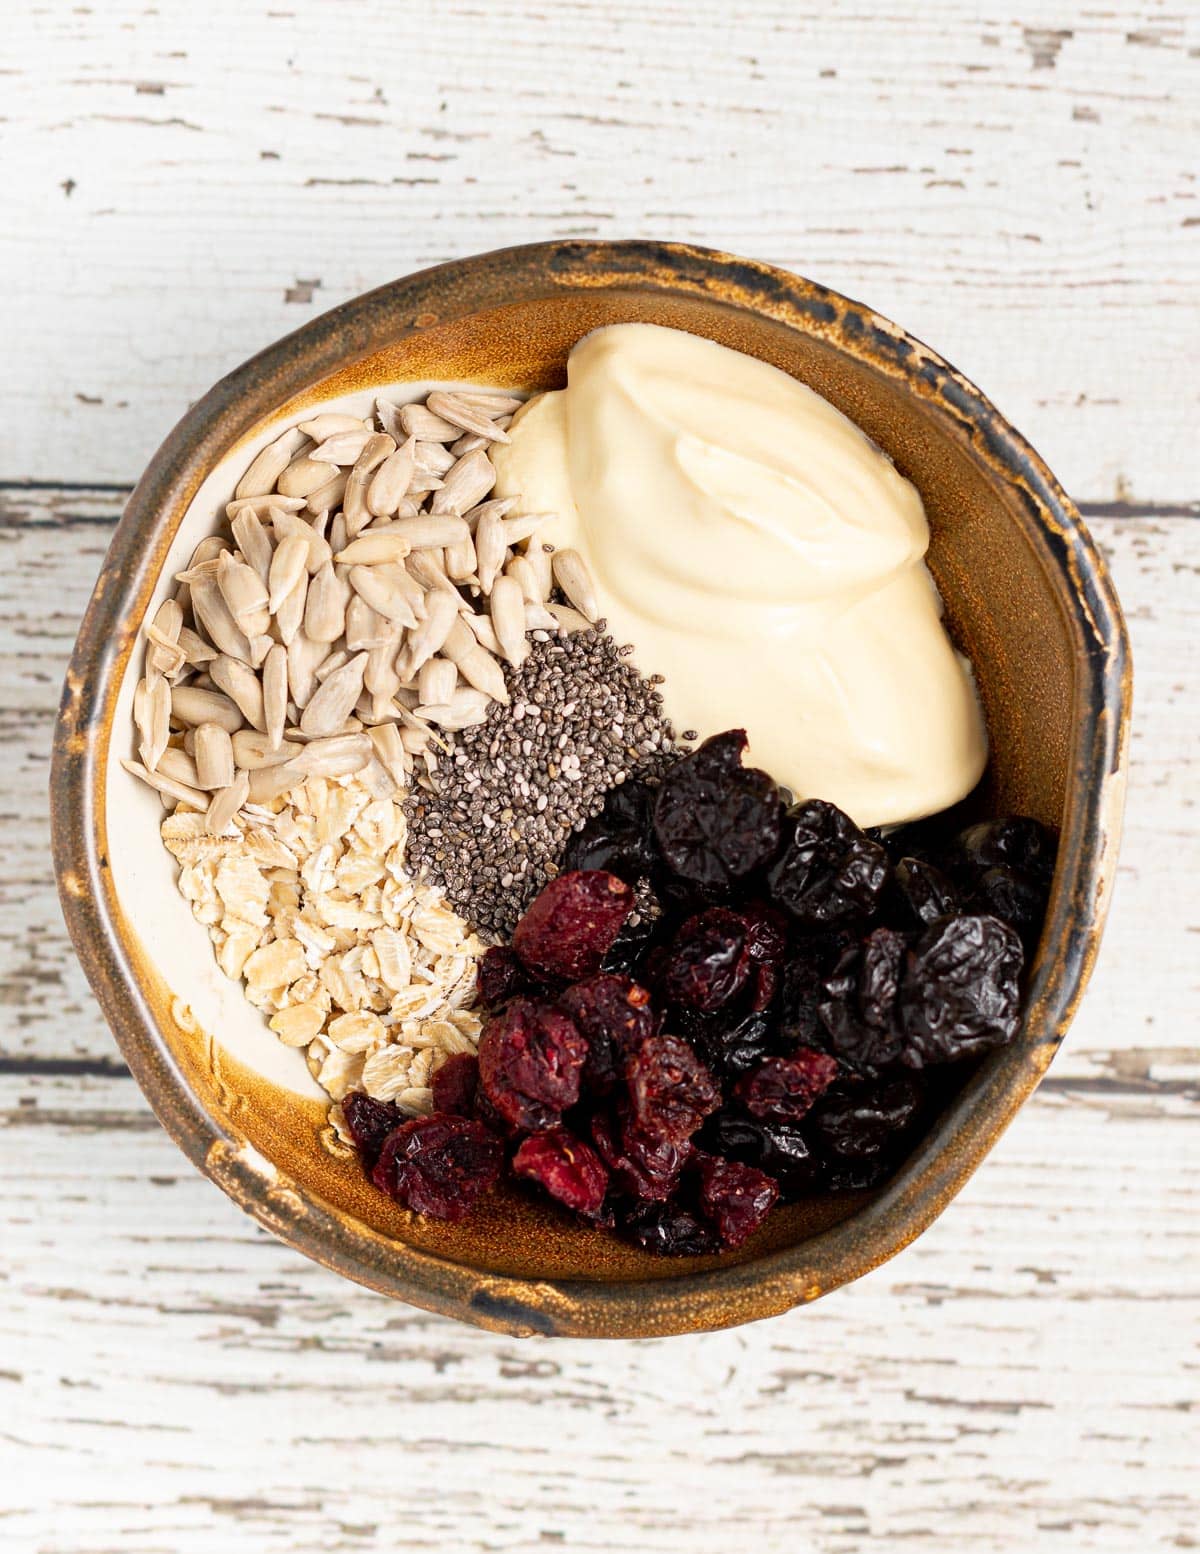 dried fruit, oats, seeds and yogurt in a bowl